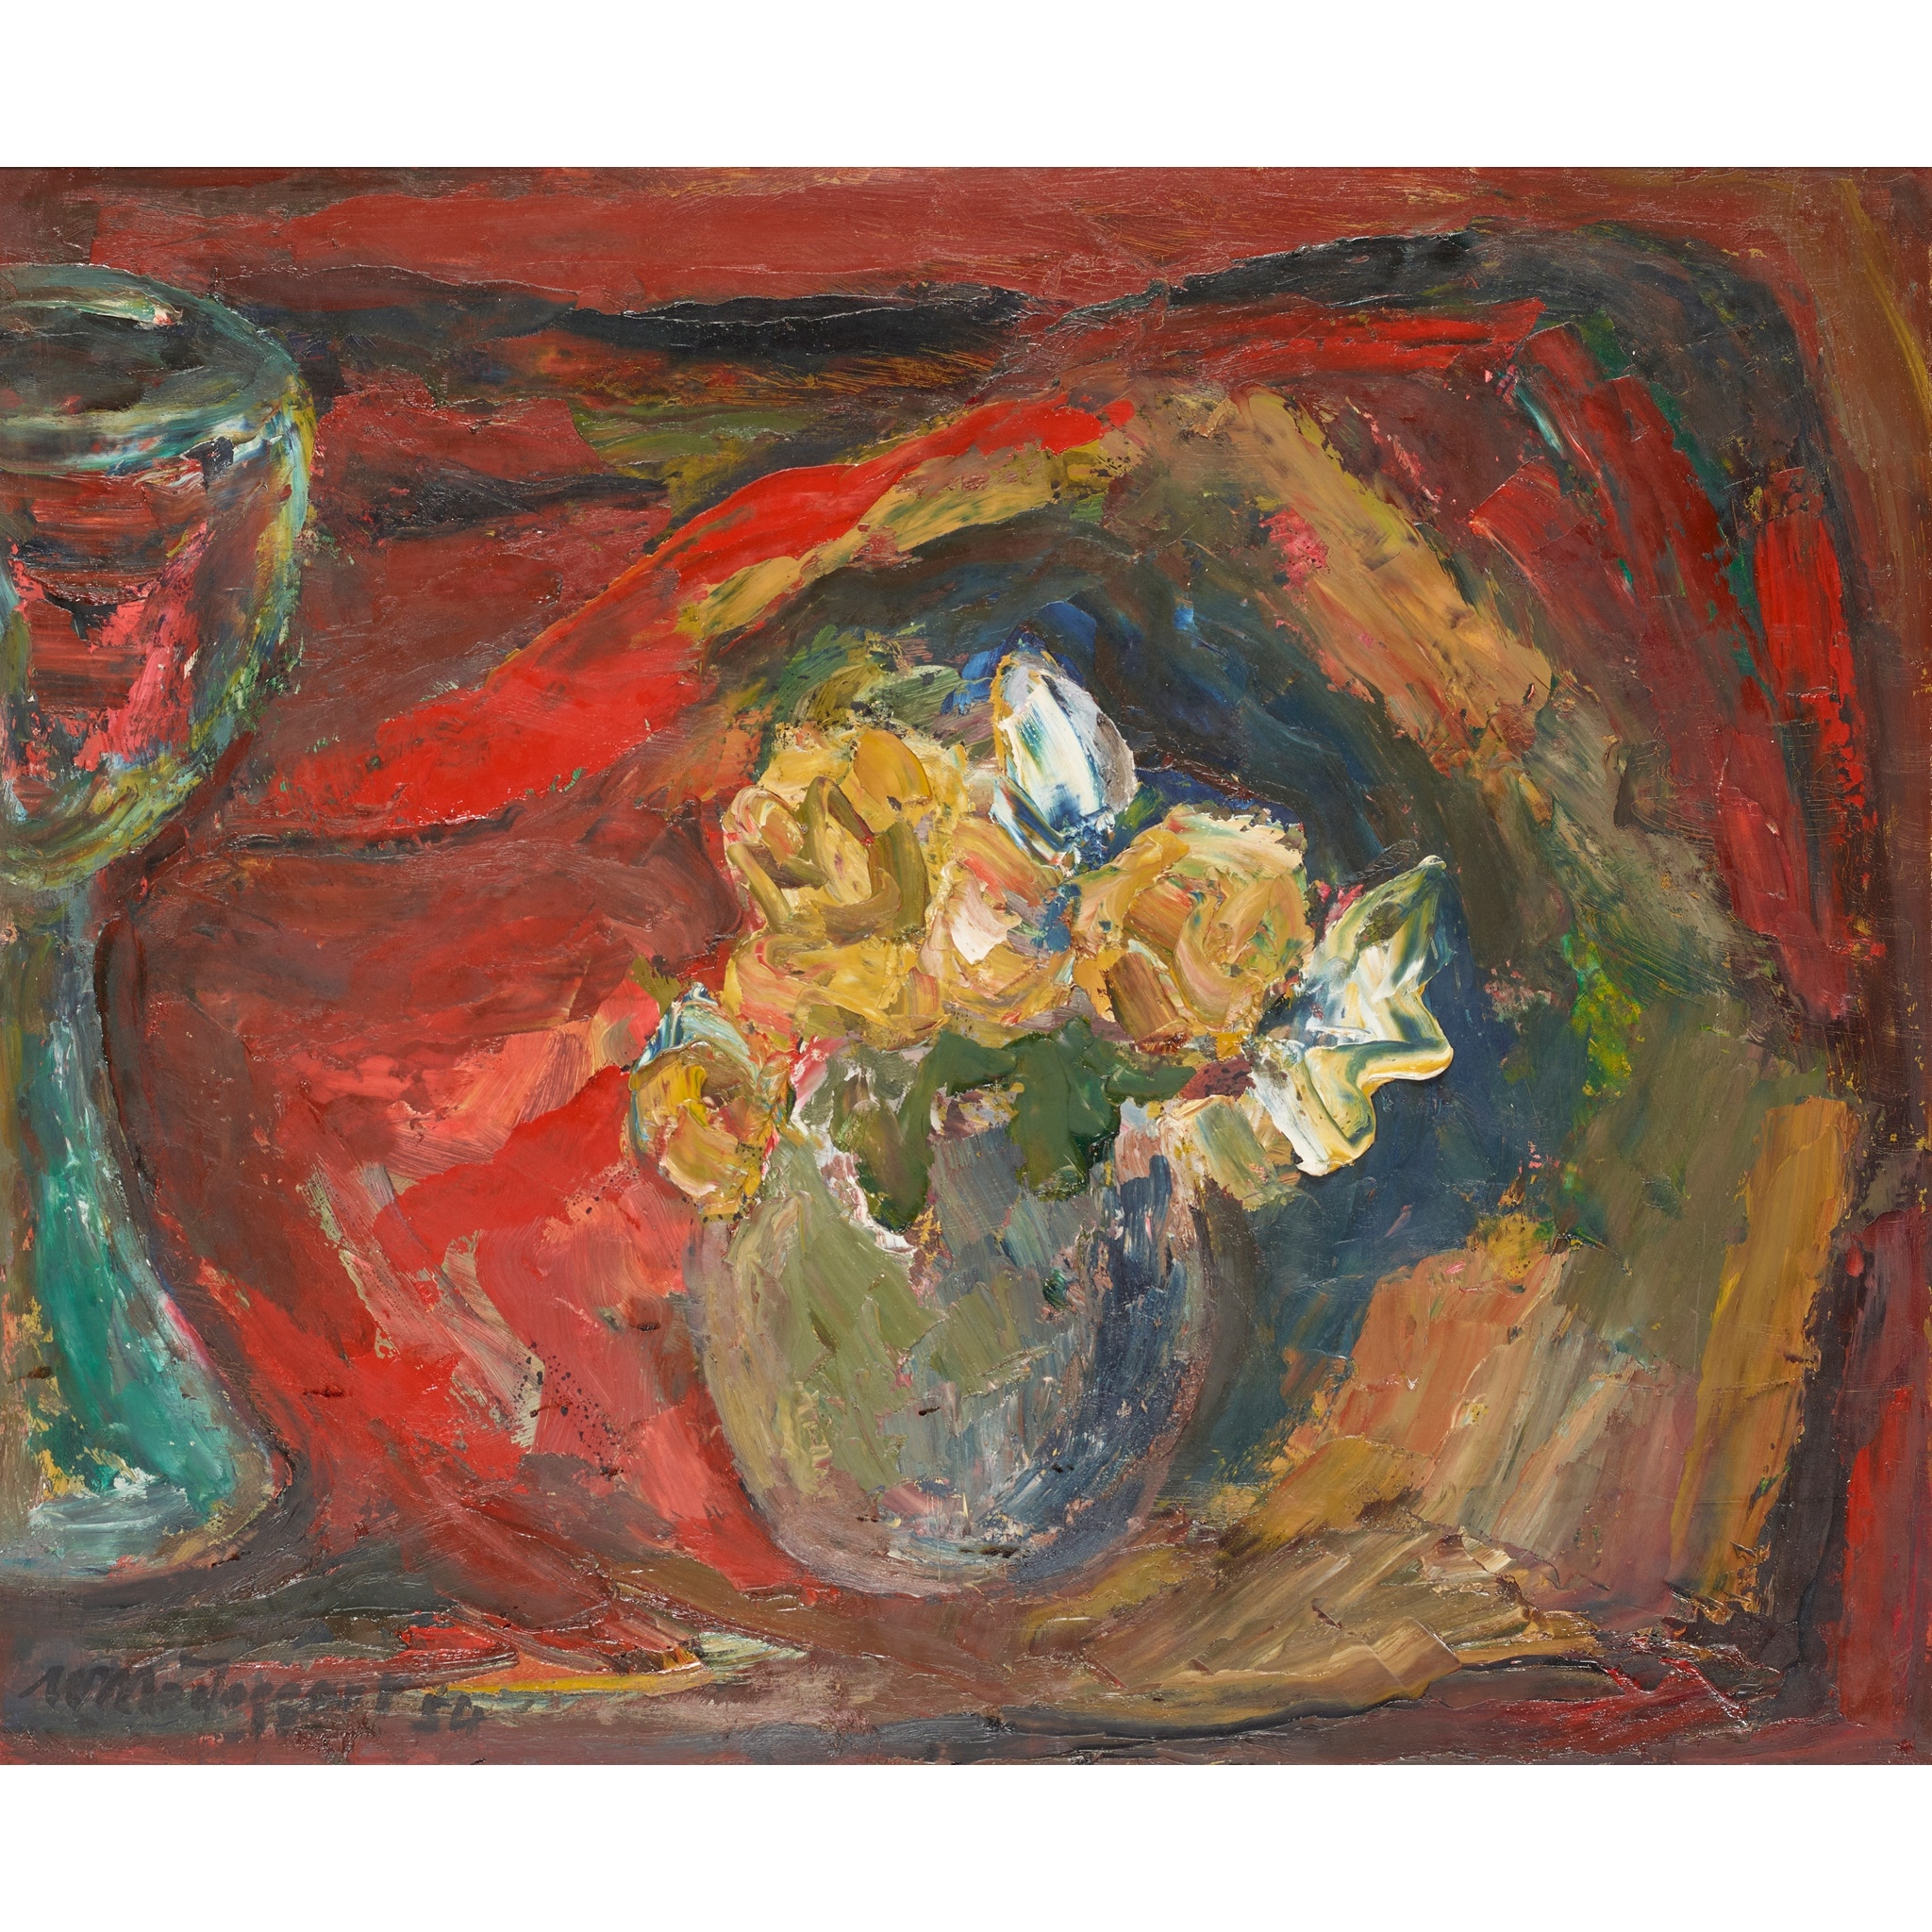 FLOWERS AND GOBLET by Sir William MacTaggart, '54